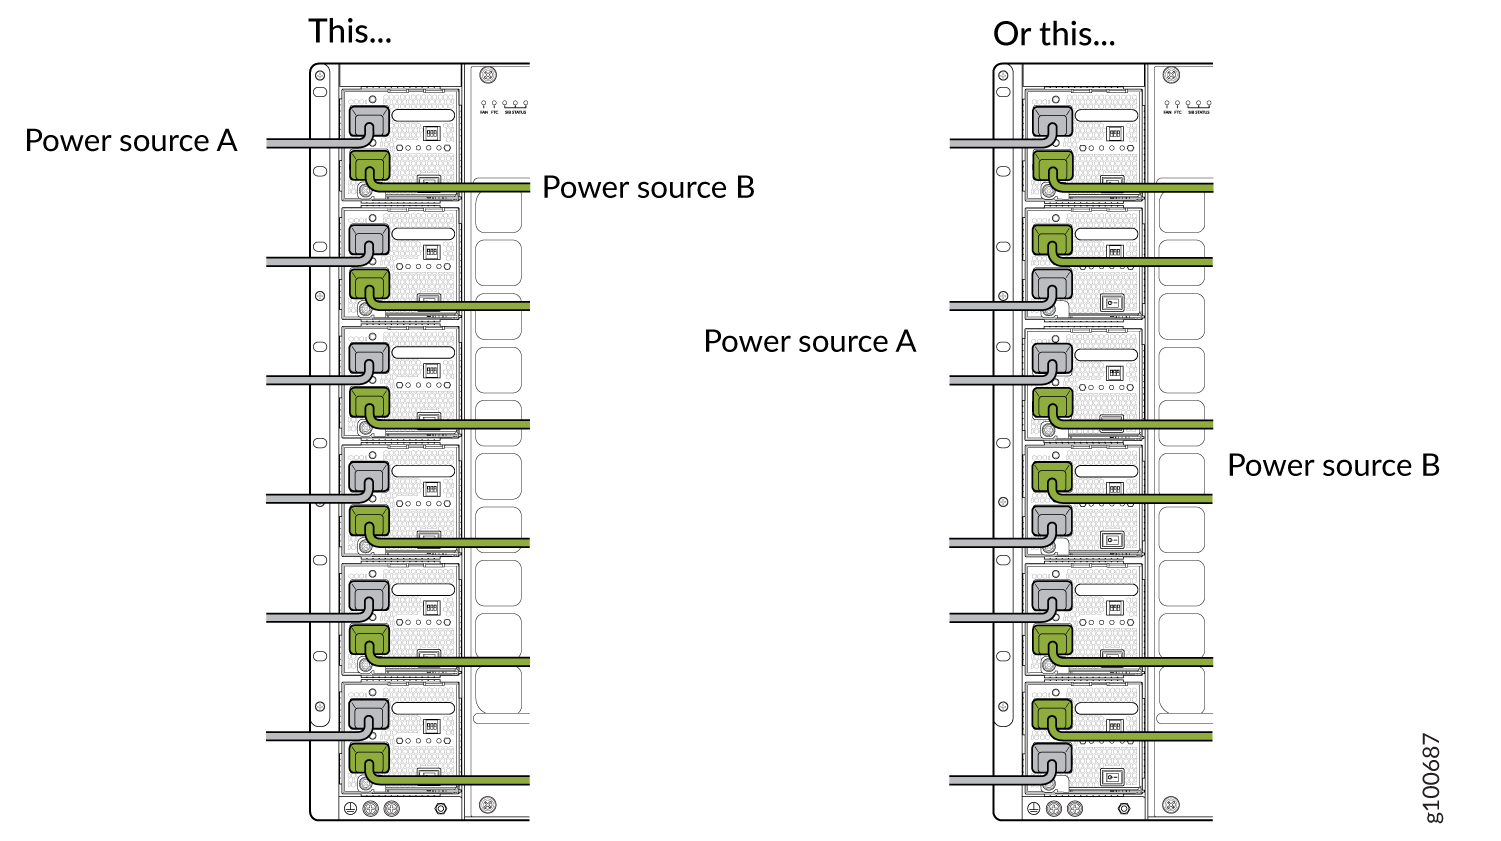 Proper Load Balancing for JNP10K-PWR-AC2 Power Cables on MX10008